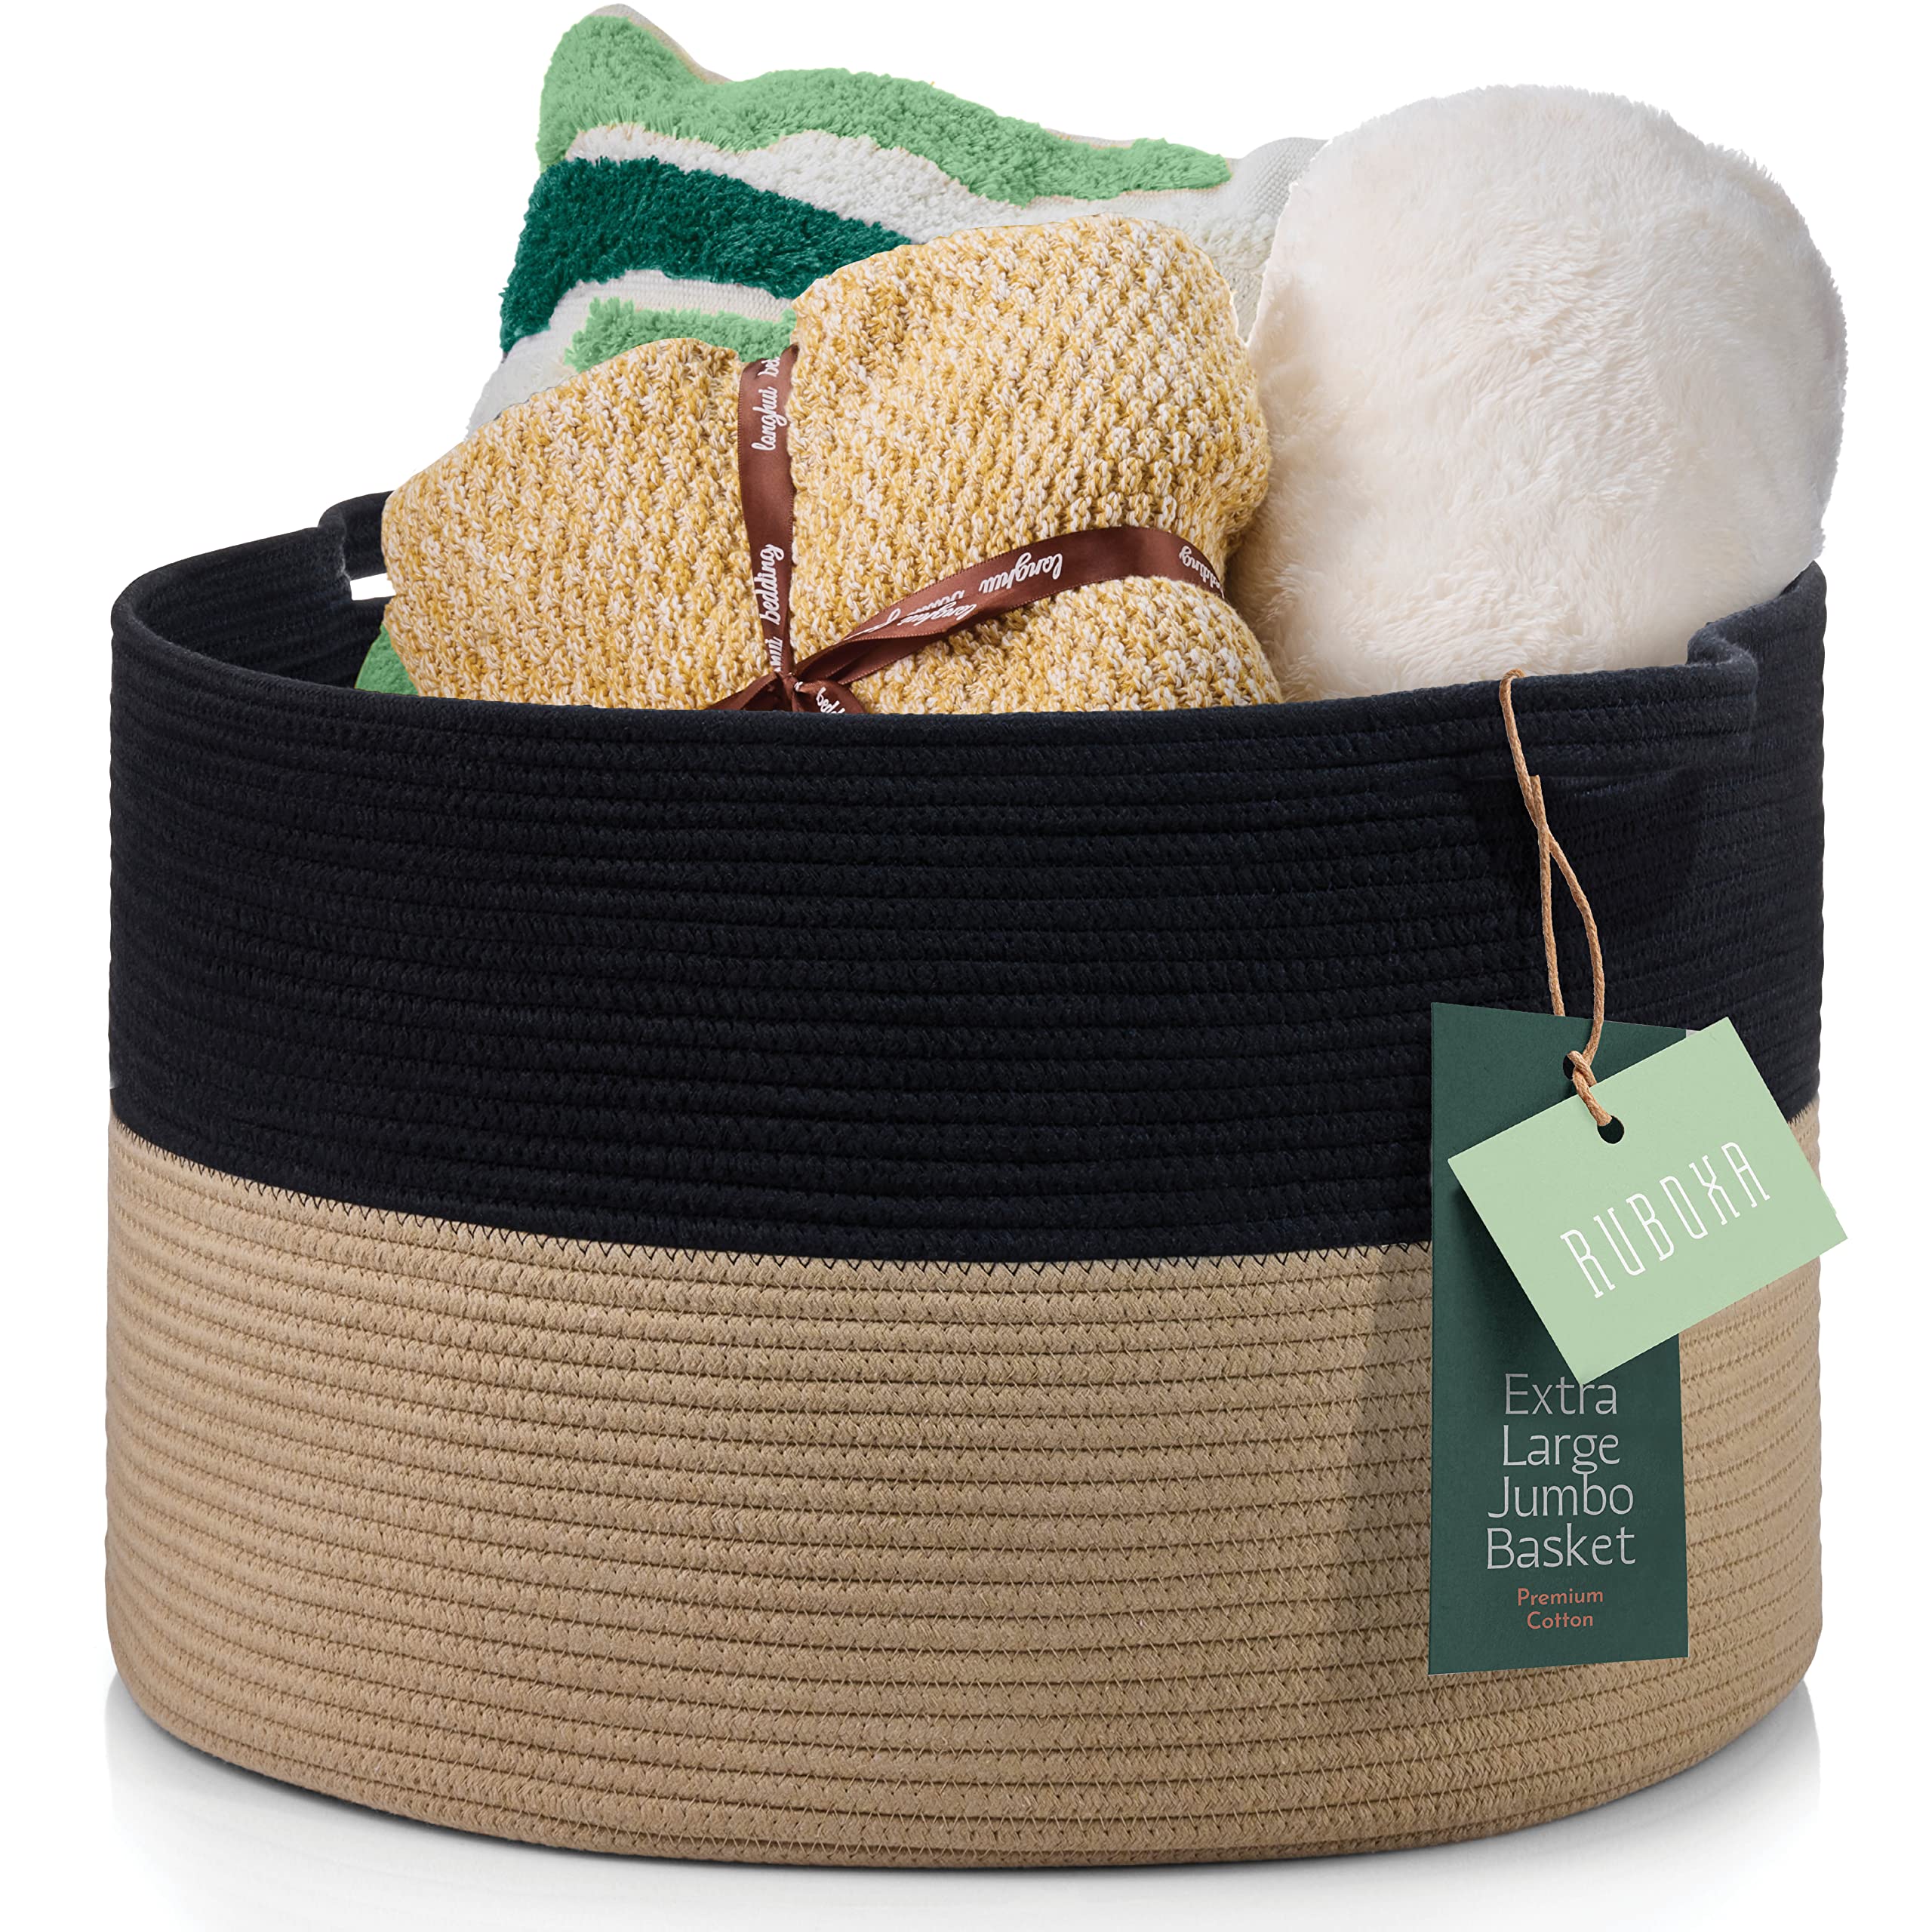 Decorative Jumbo Blanket Basket for Living Room - 100% Cotton Rope Woven Basket for Storage with 2 Easy Carry Handles, (Holds up to 40Lb) for Pillows, Blankets, Laundry Hamper & Baby Toy Bin, Etc.  - Like New